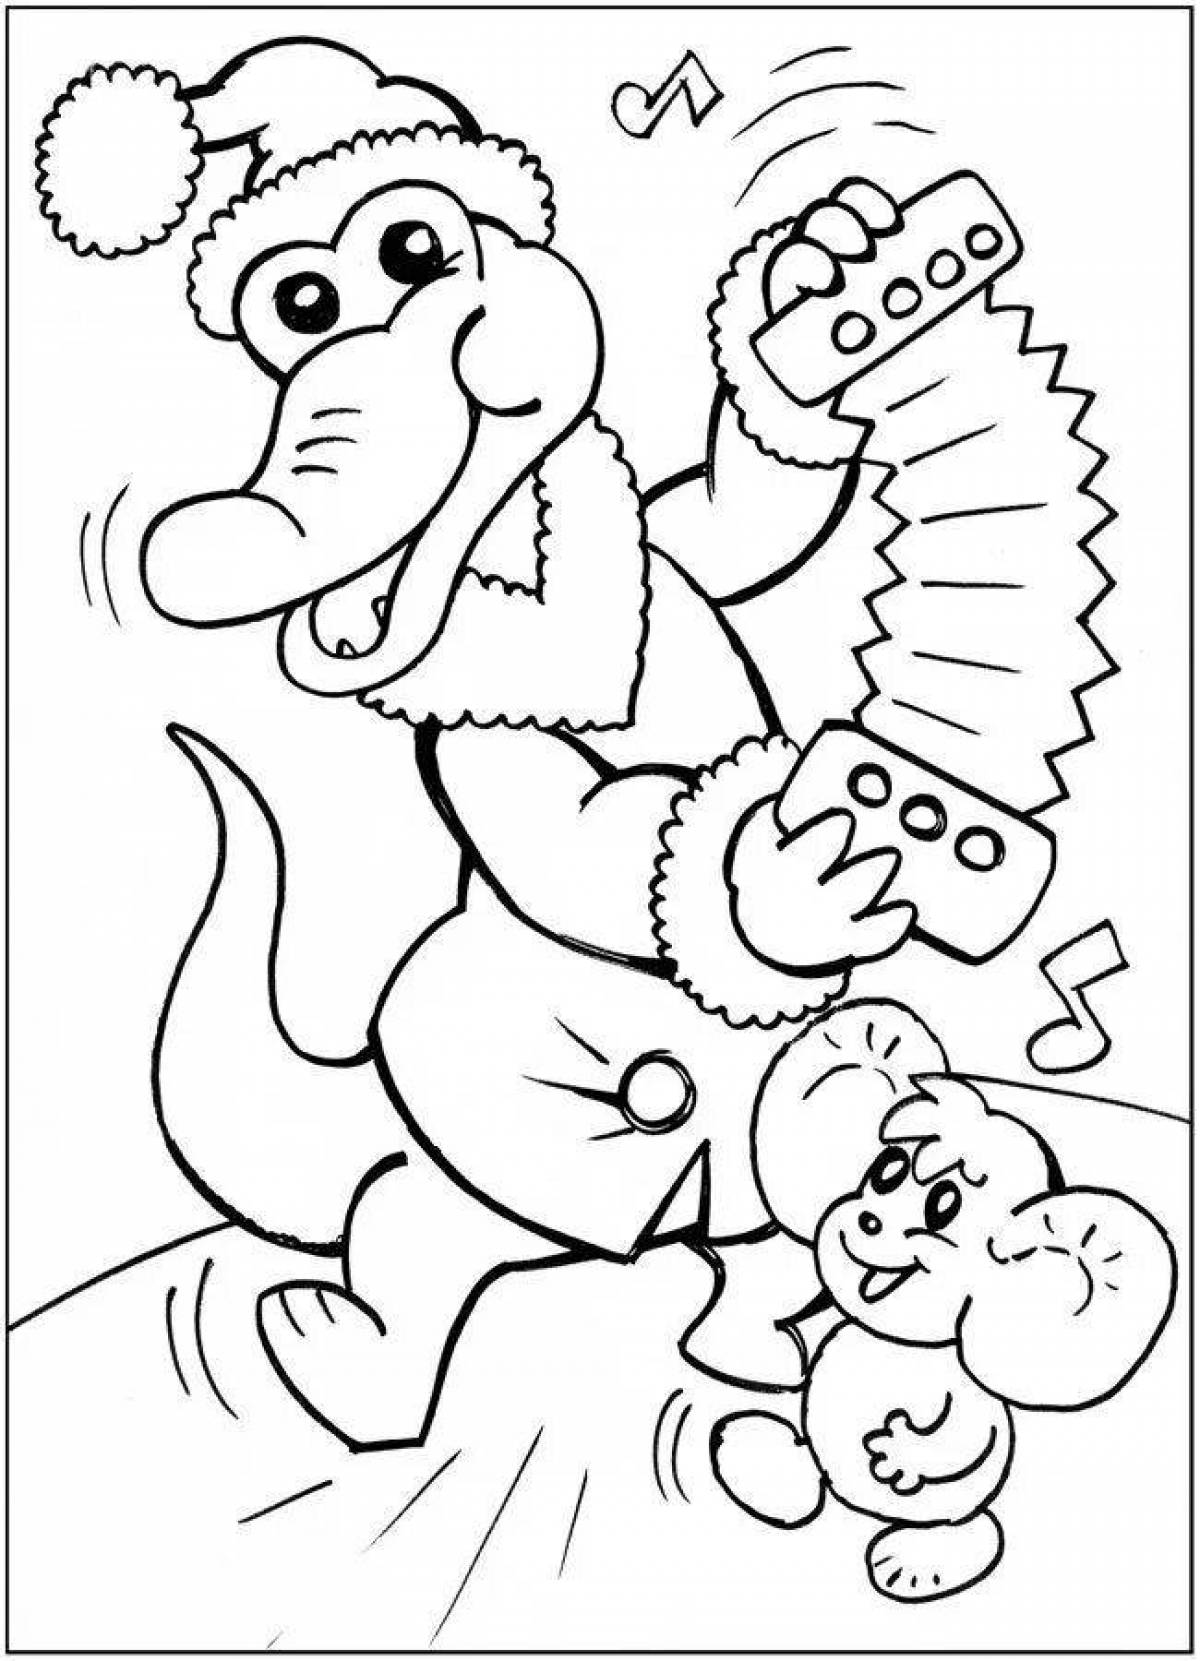 Glitter genie coloring page